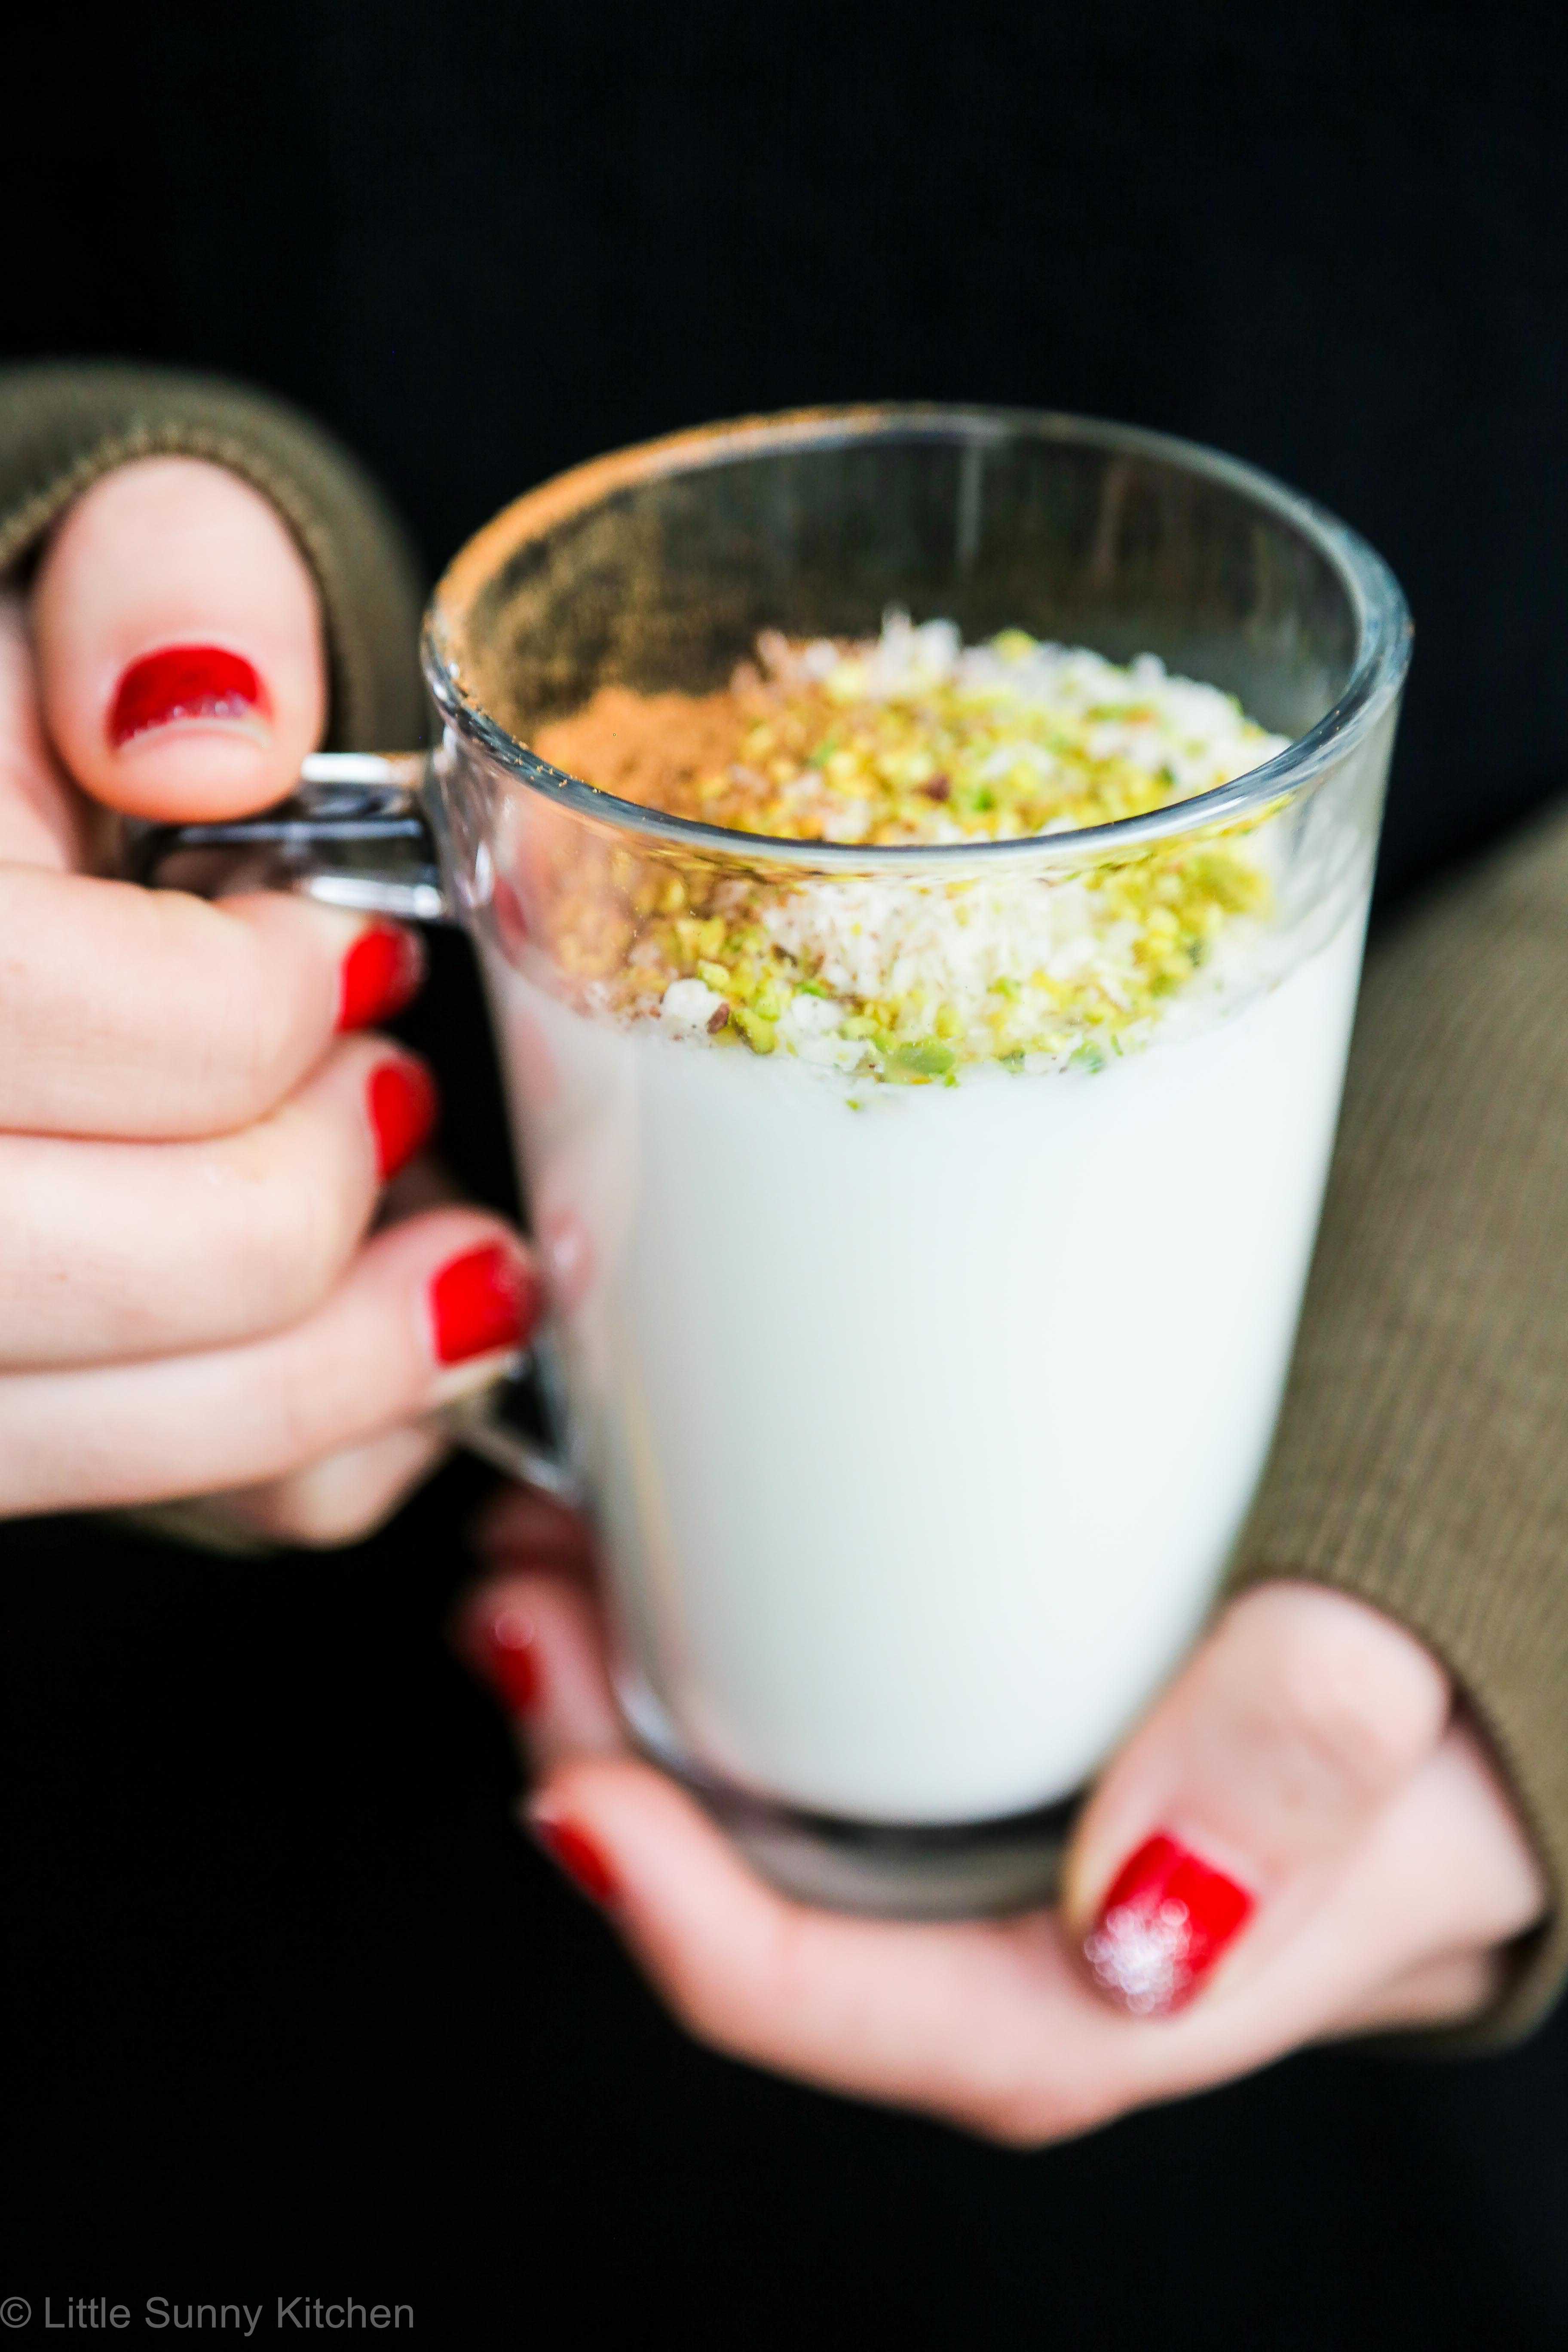 Girl holding a glass mug filled with sahlab